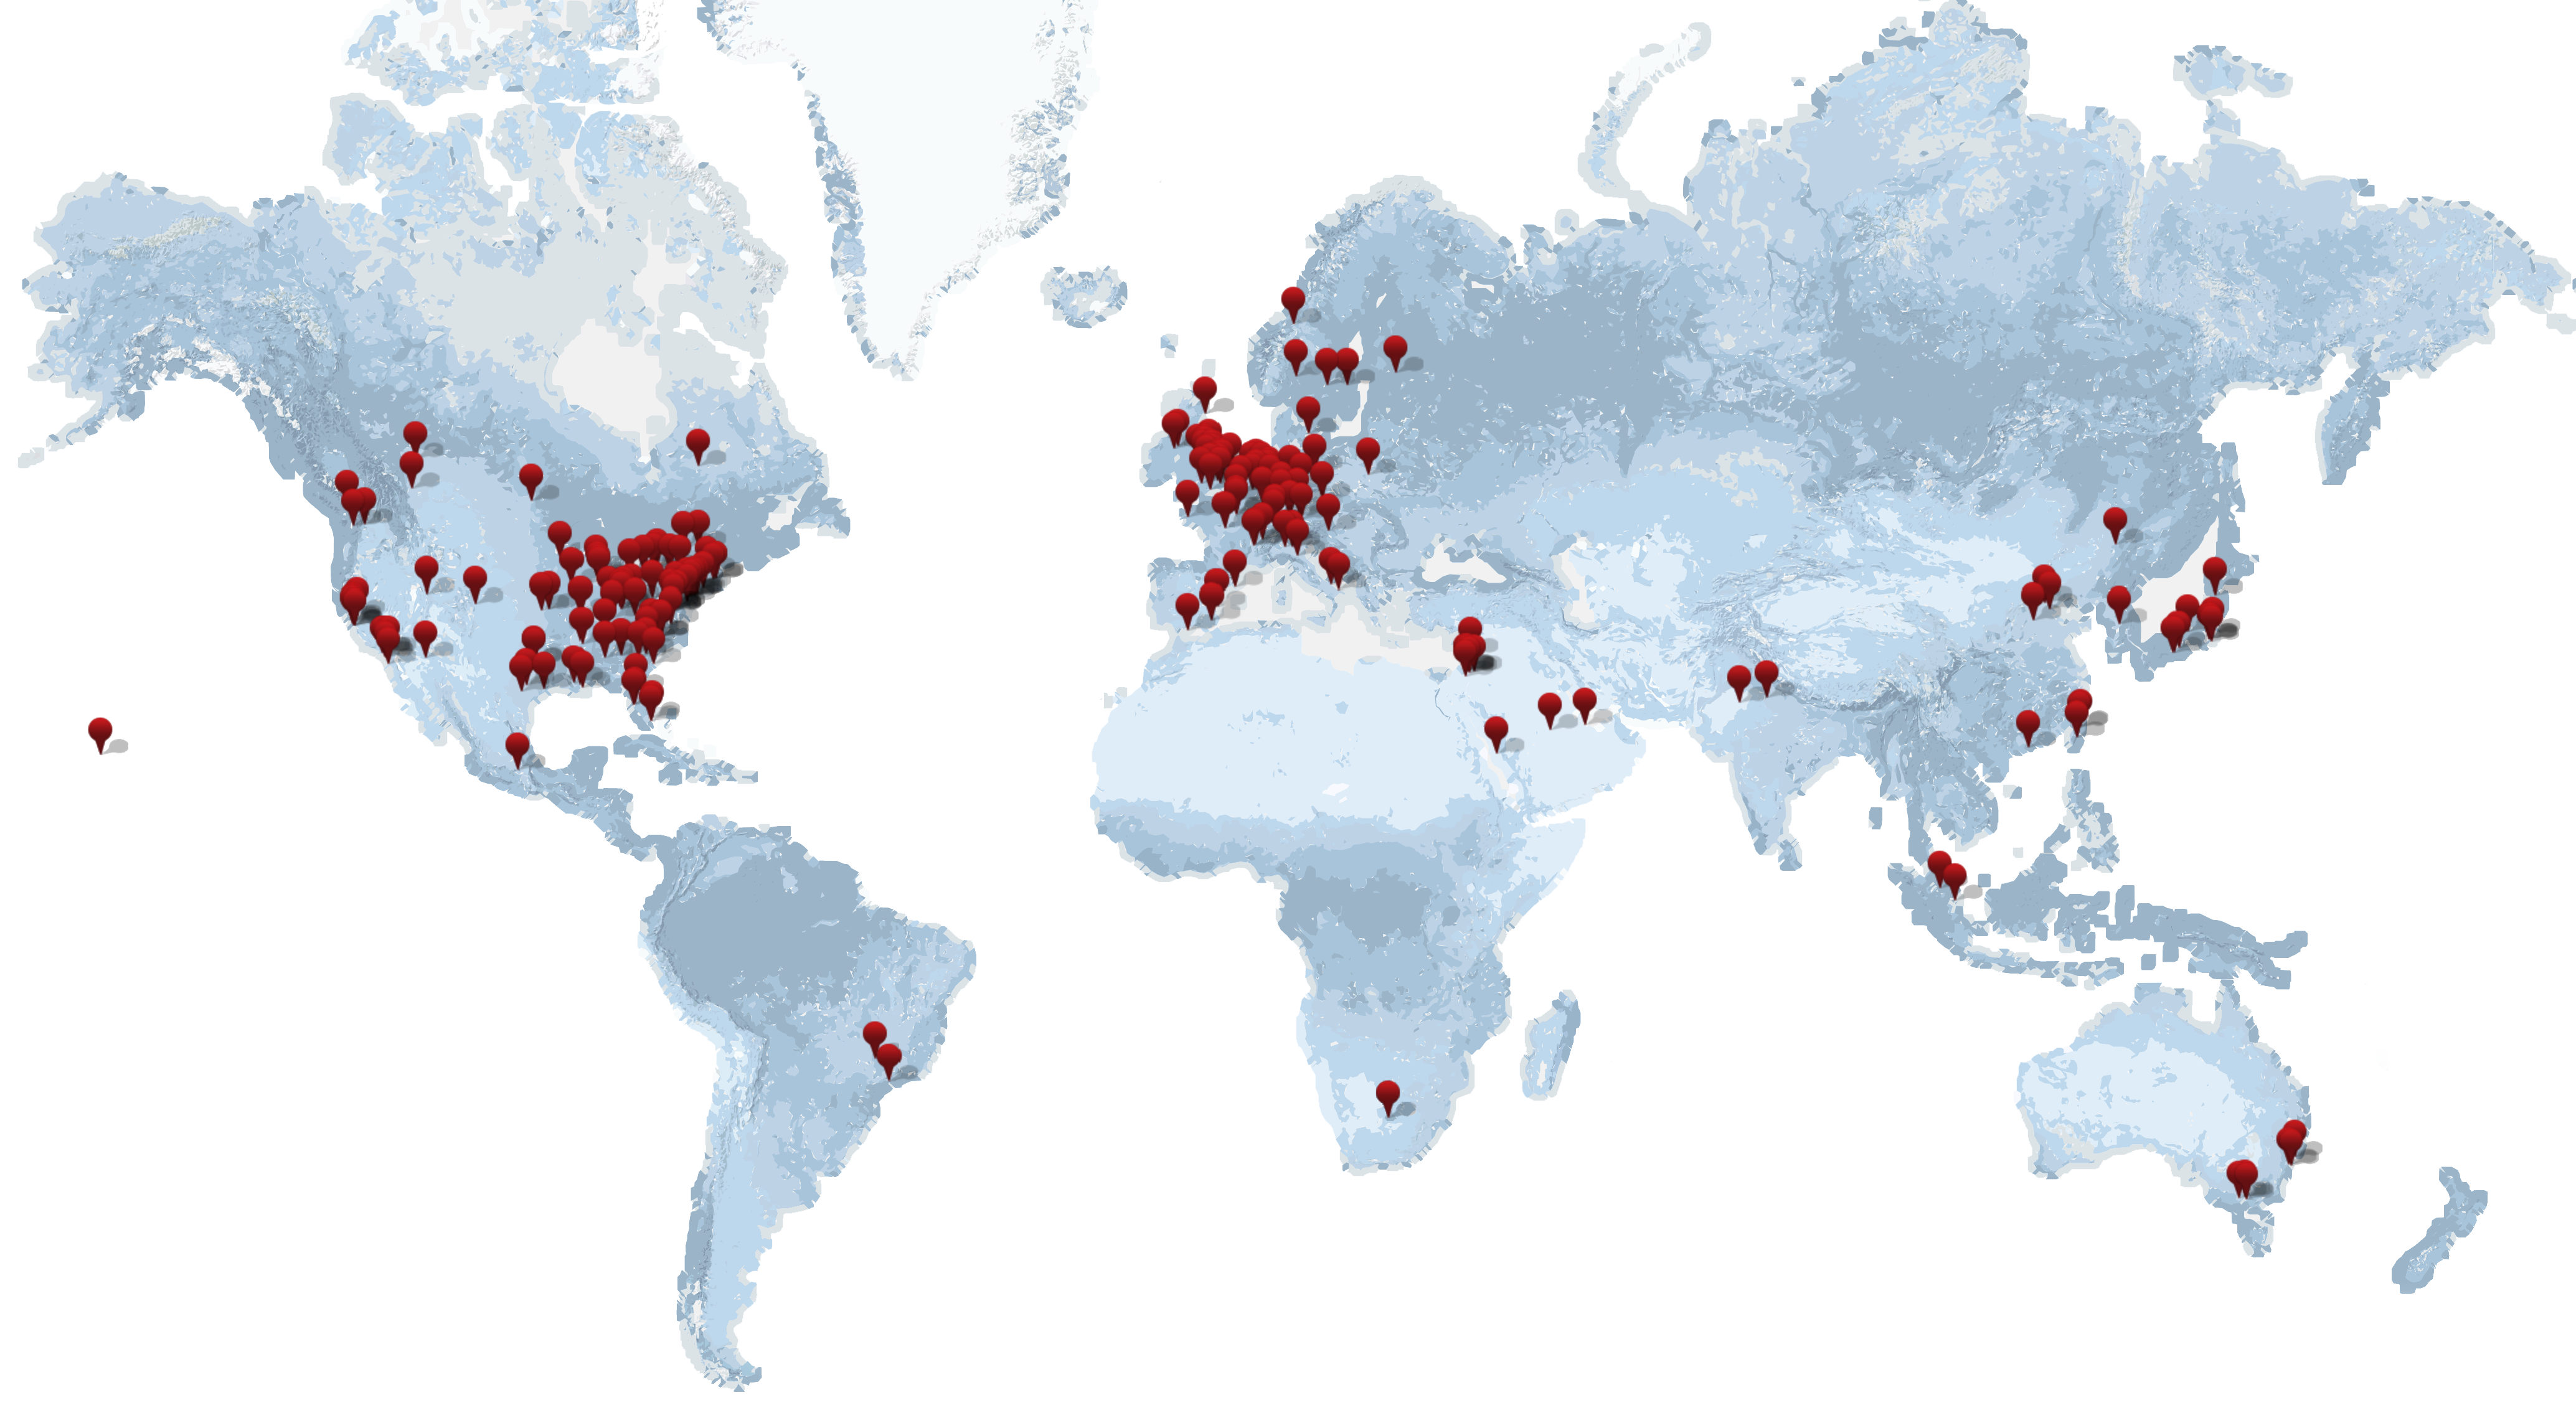 World map with pins showing the cities where Partek has customers